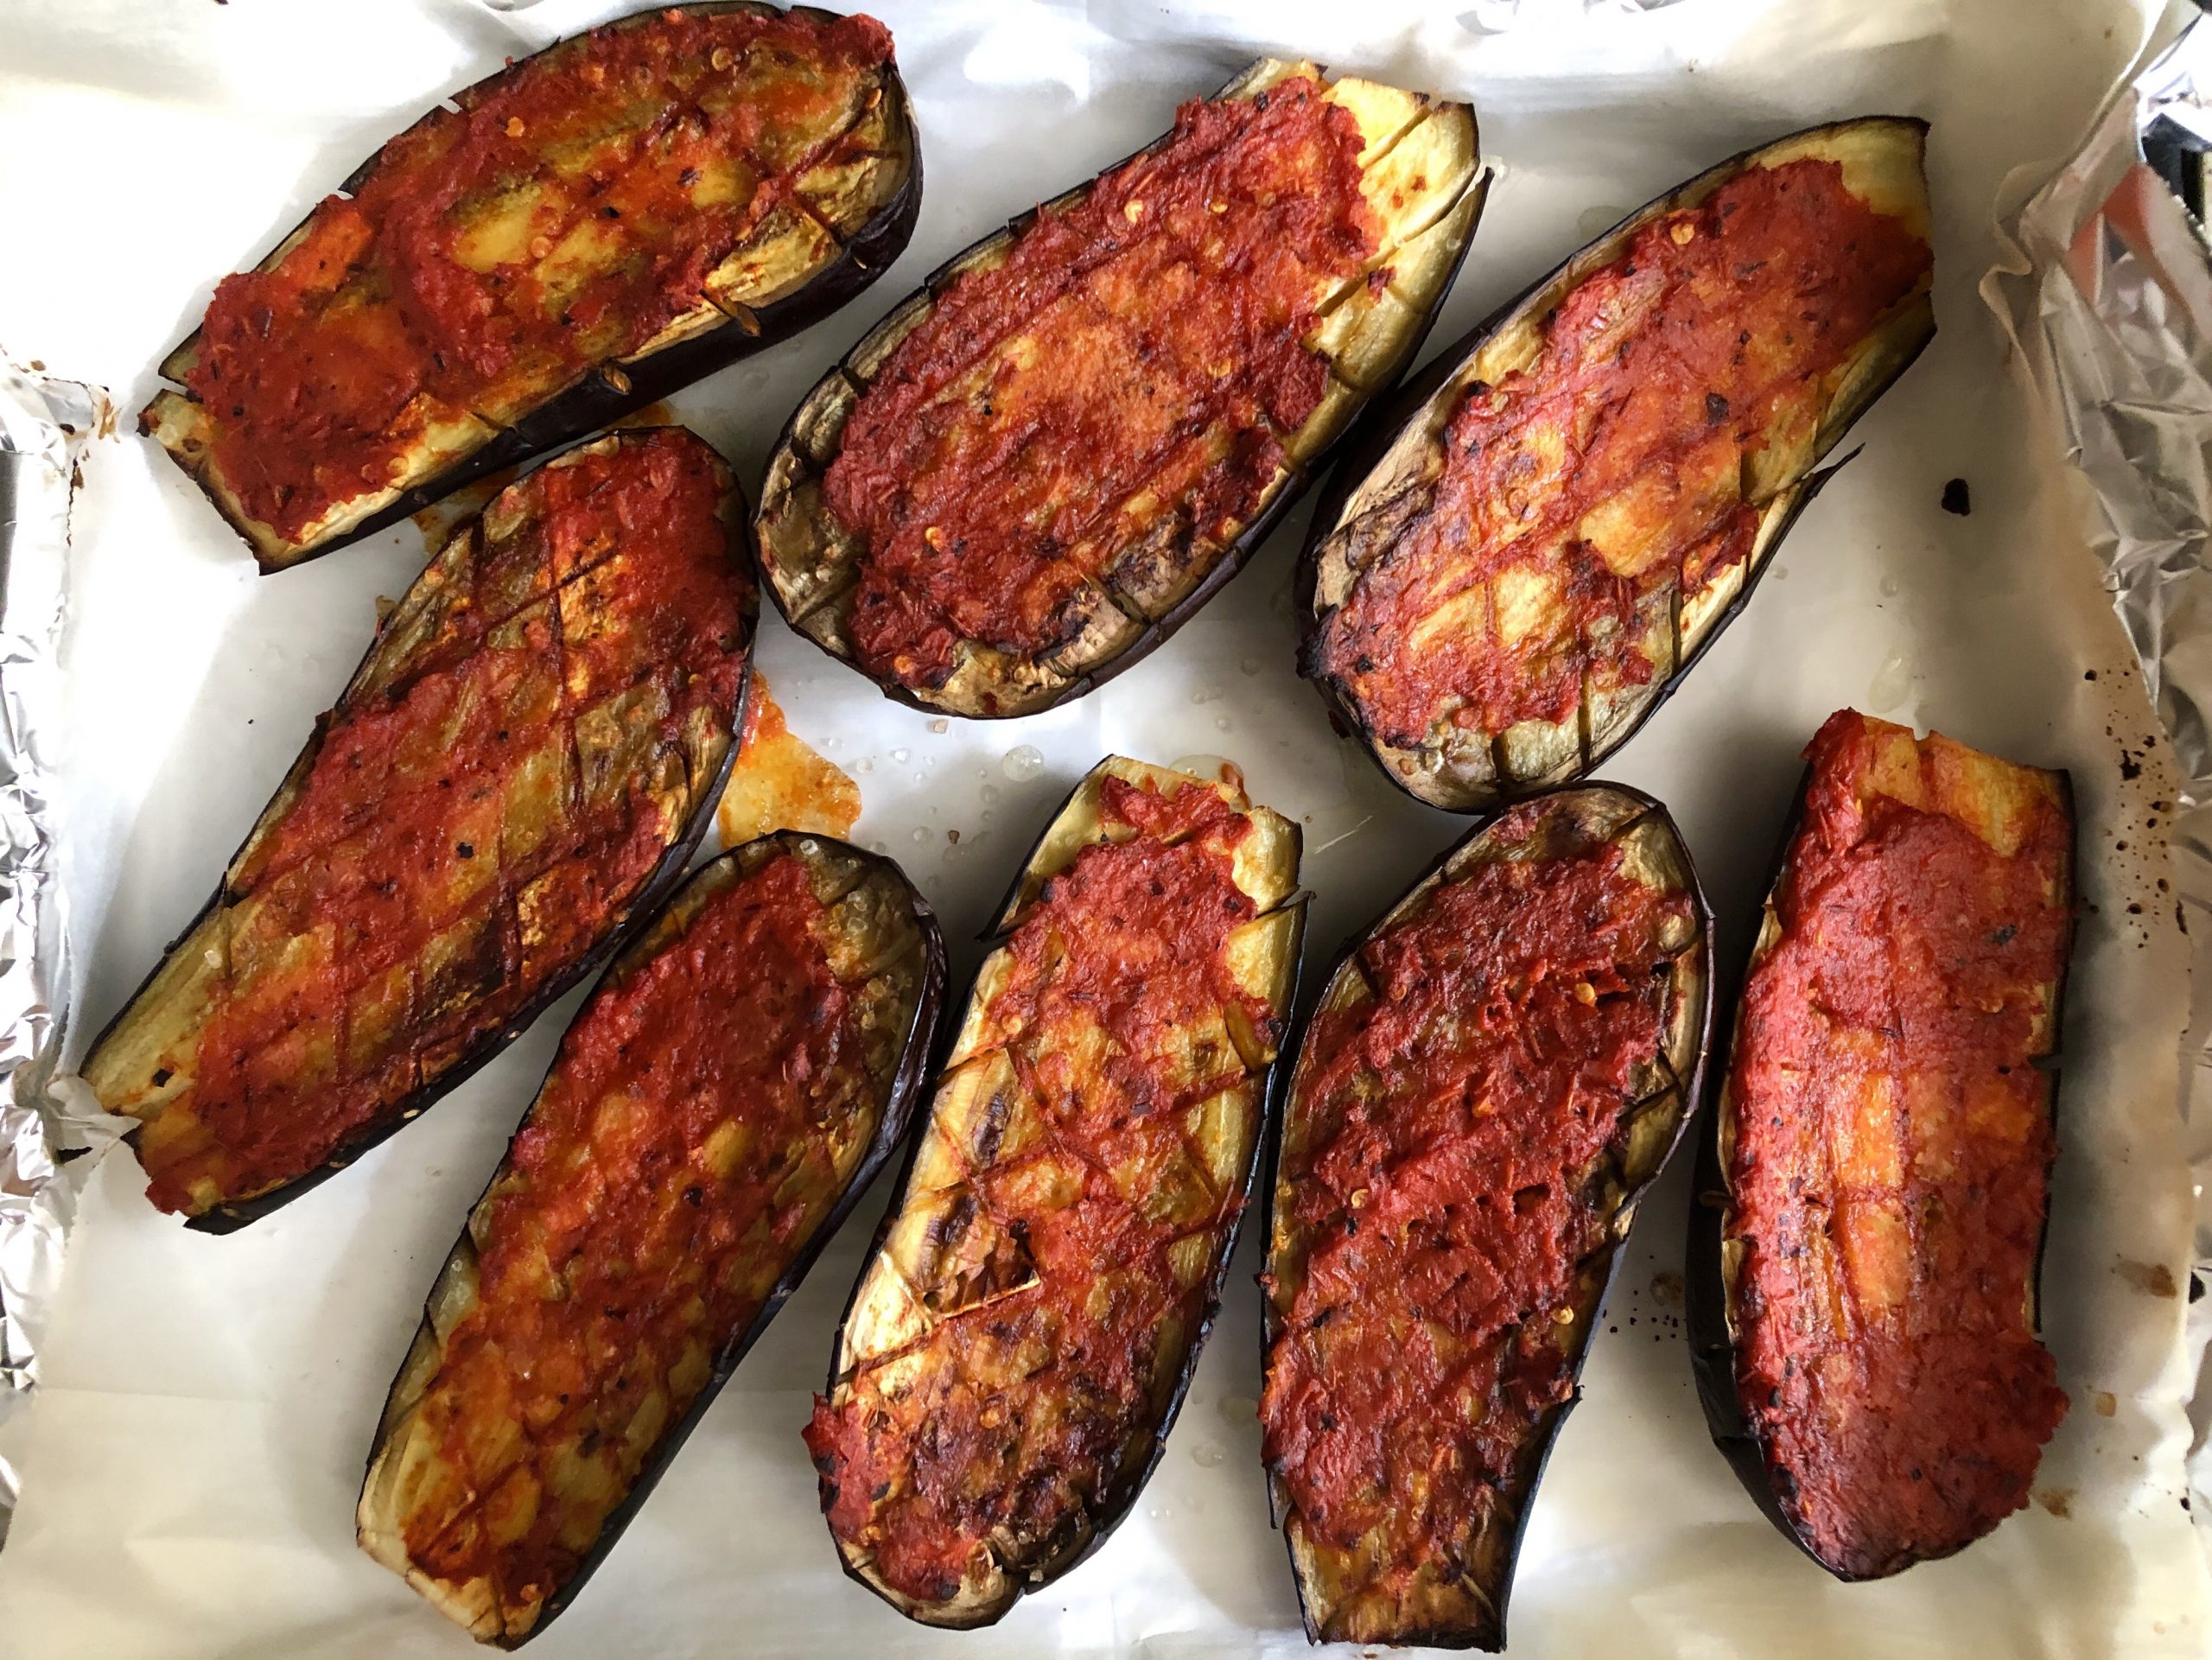 Roasted eggplants with red-pepper glaze